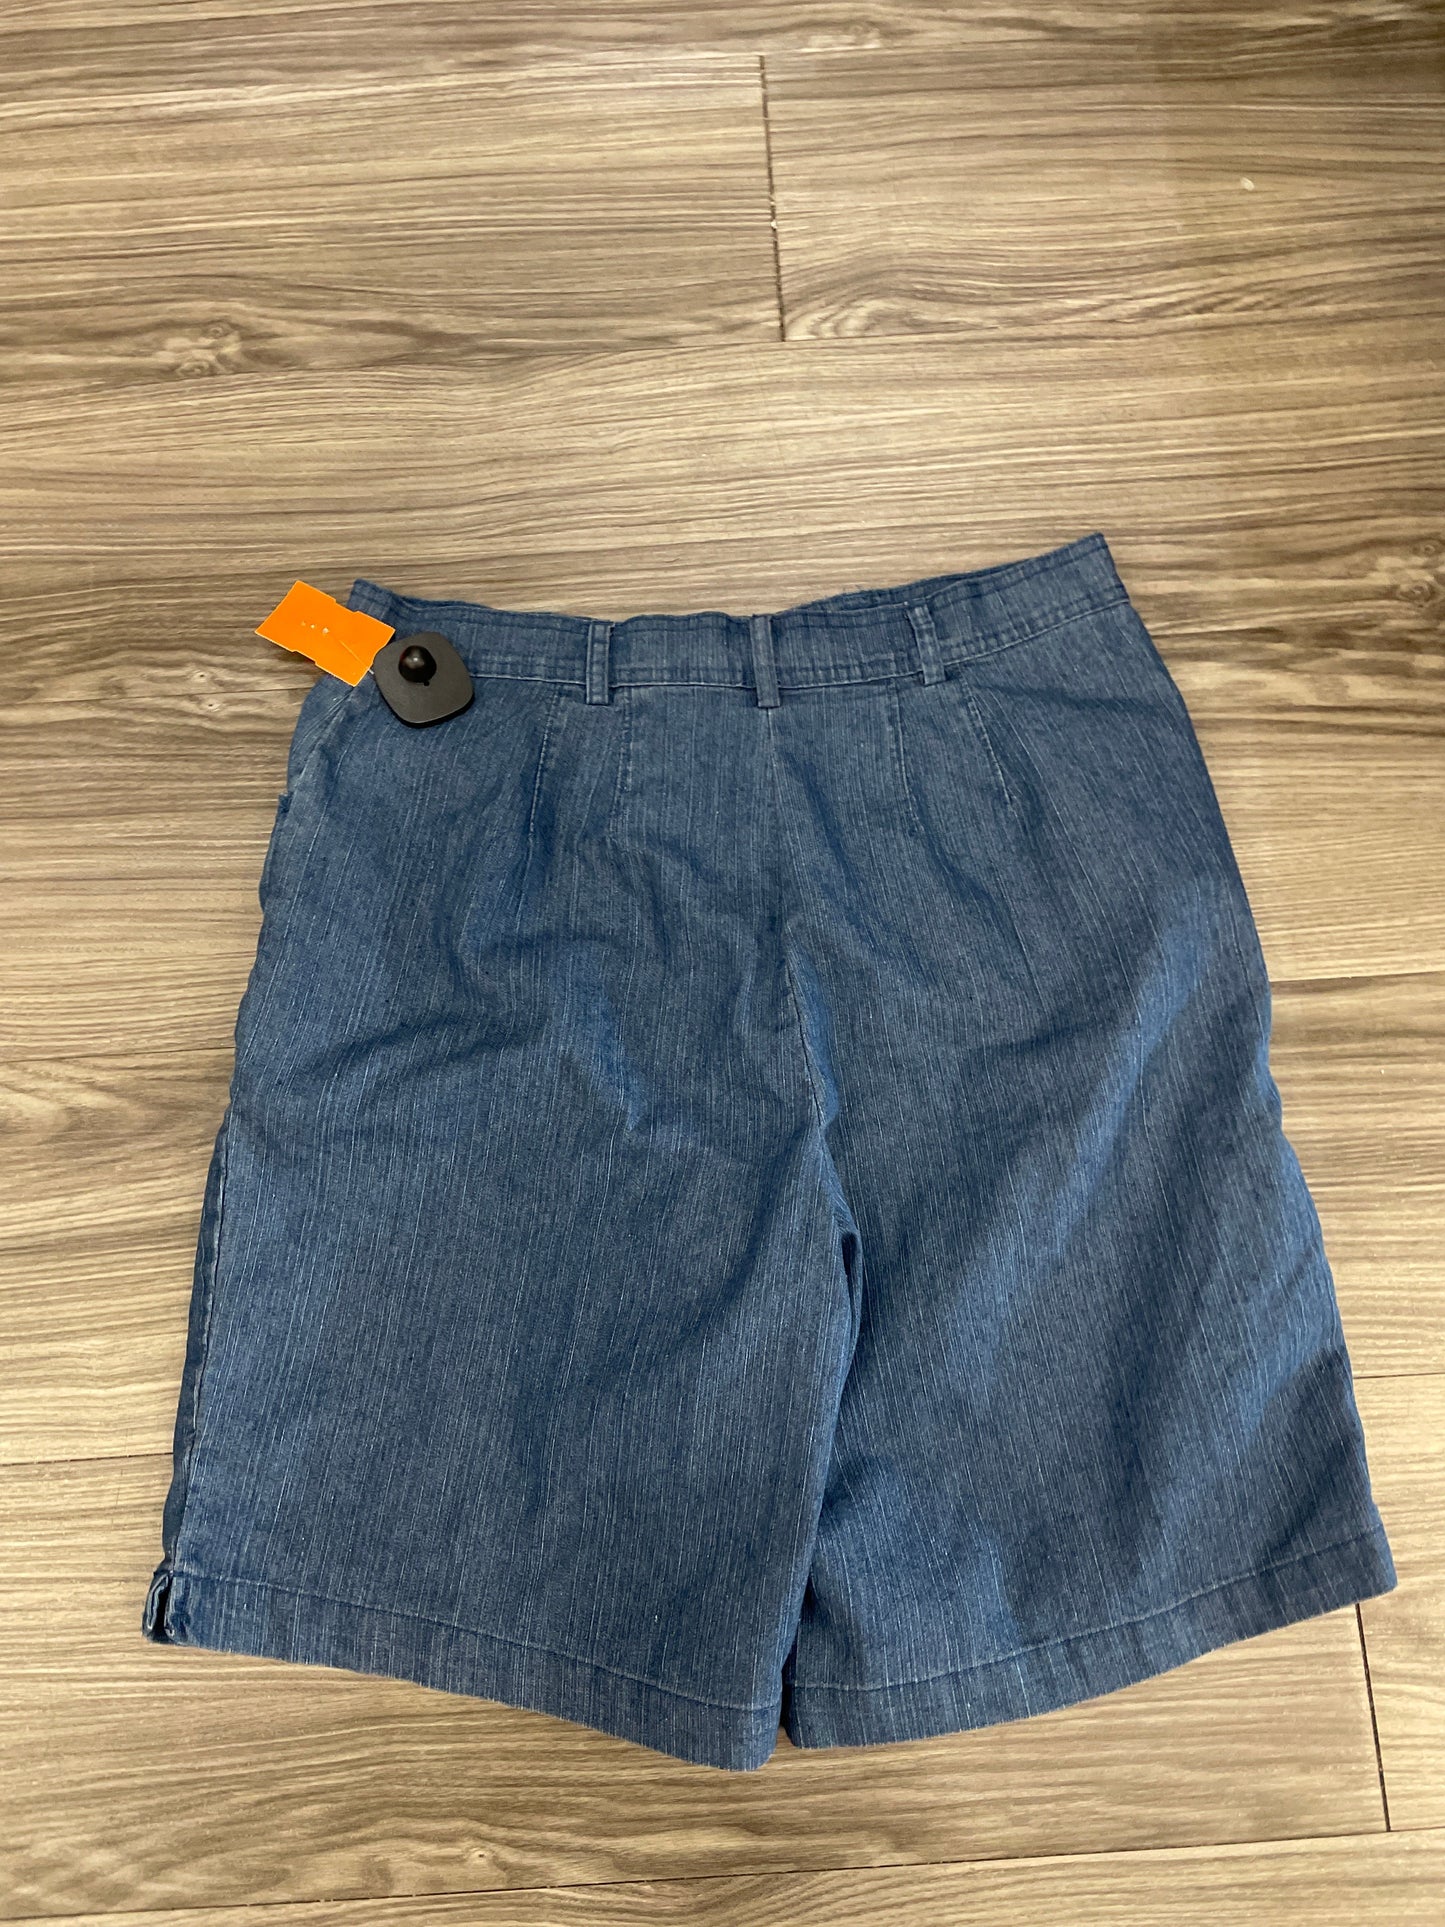 Shorts By White Stag  Size: 6